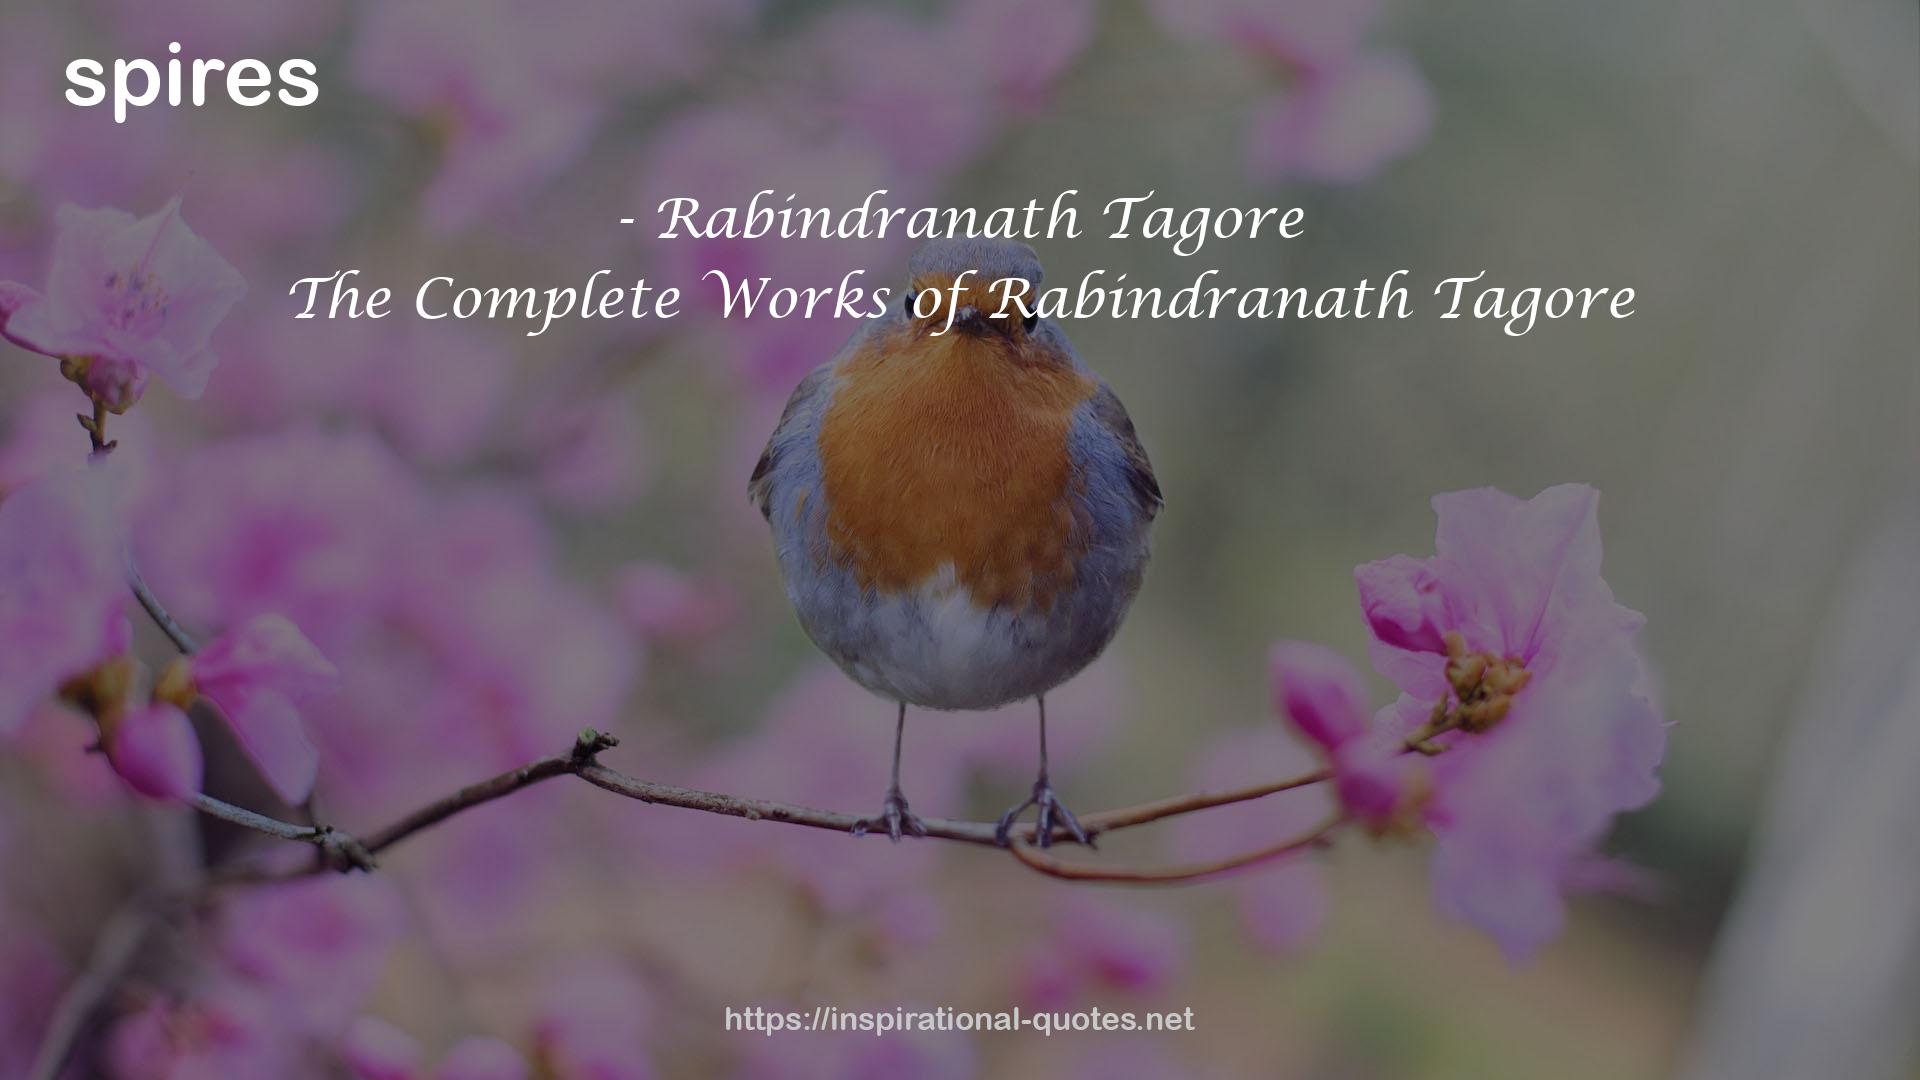 The Complete Works of Rabindranath Tagore QUOTES